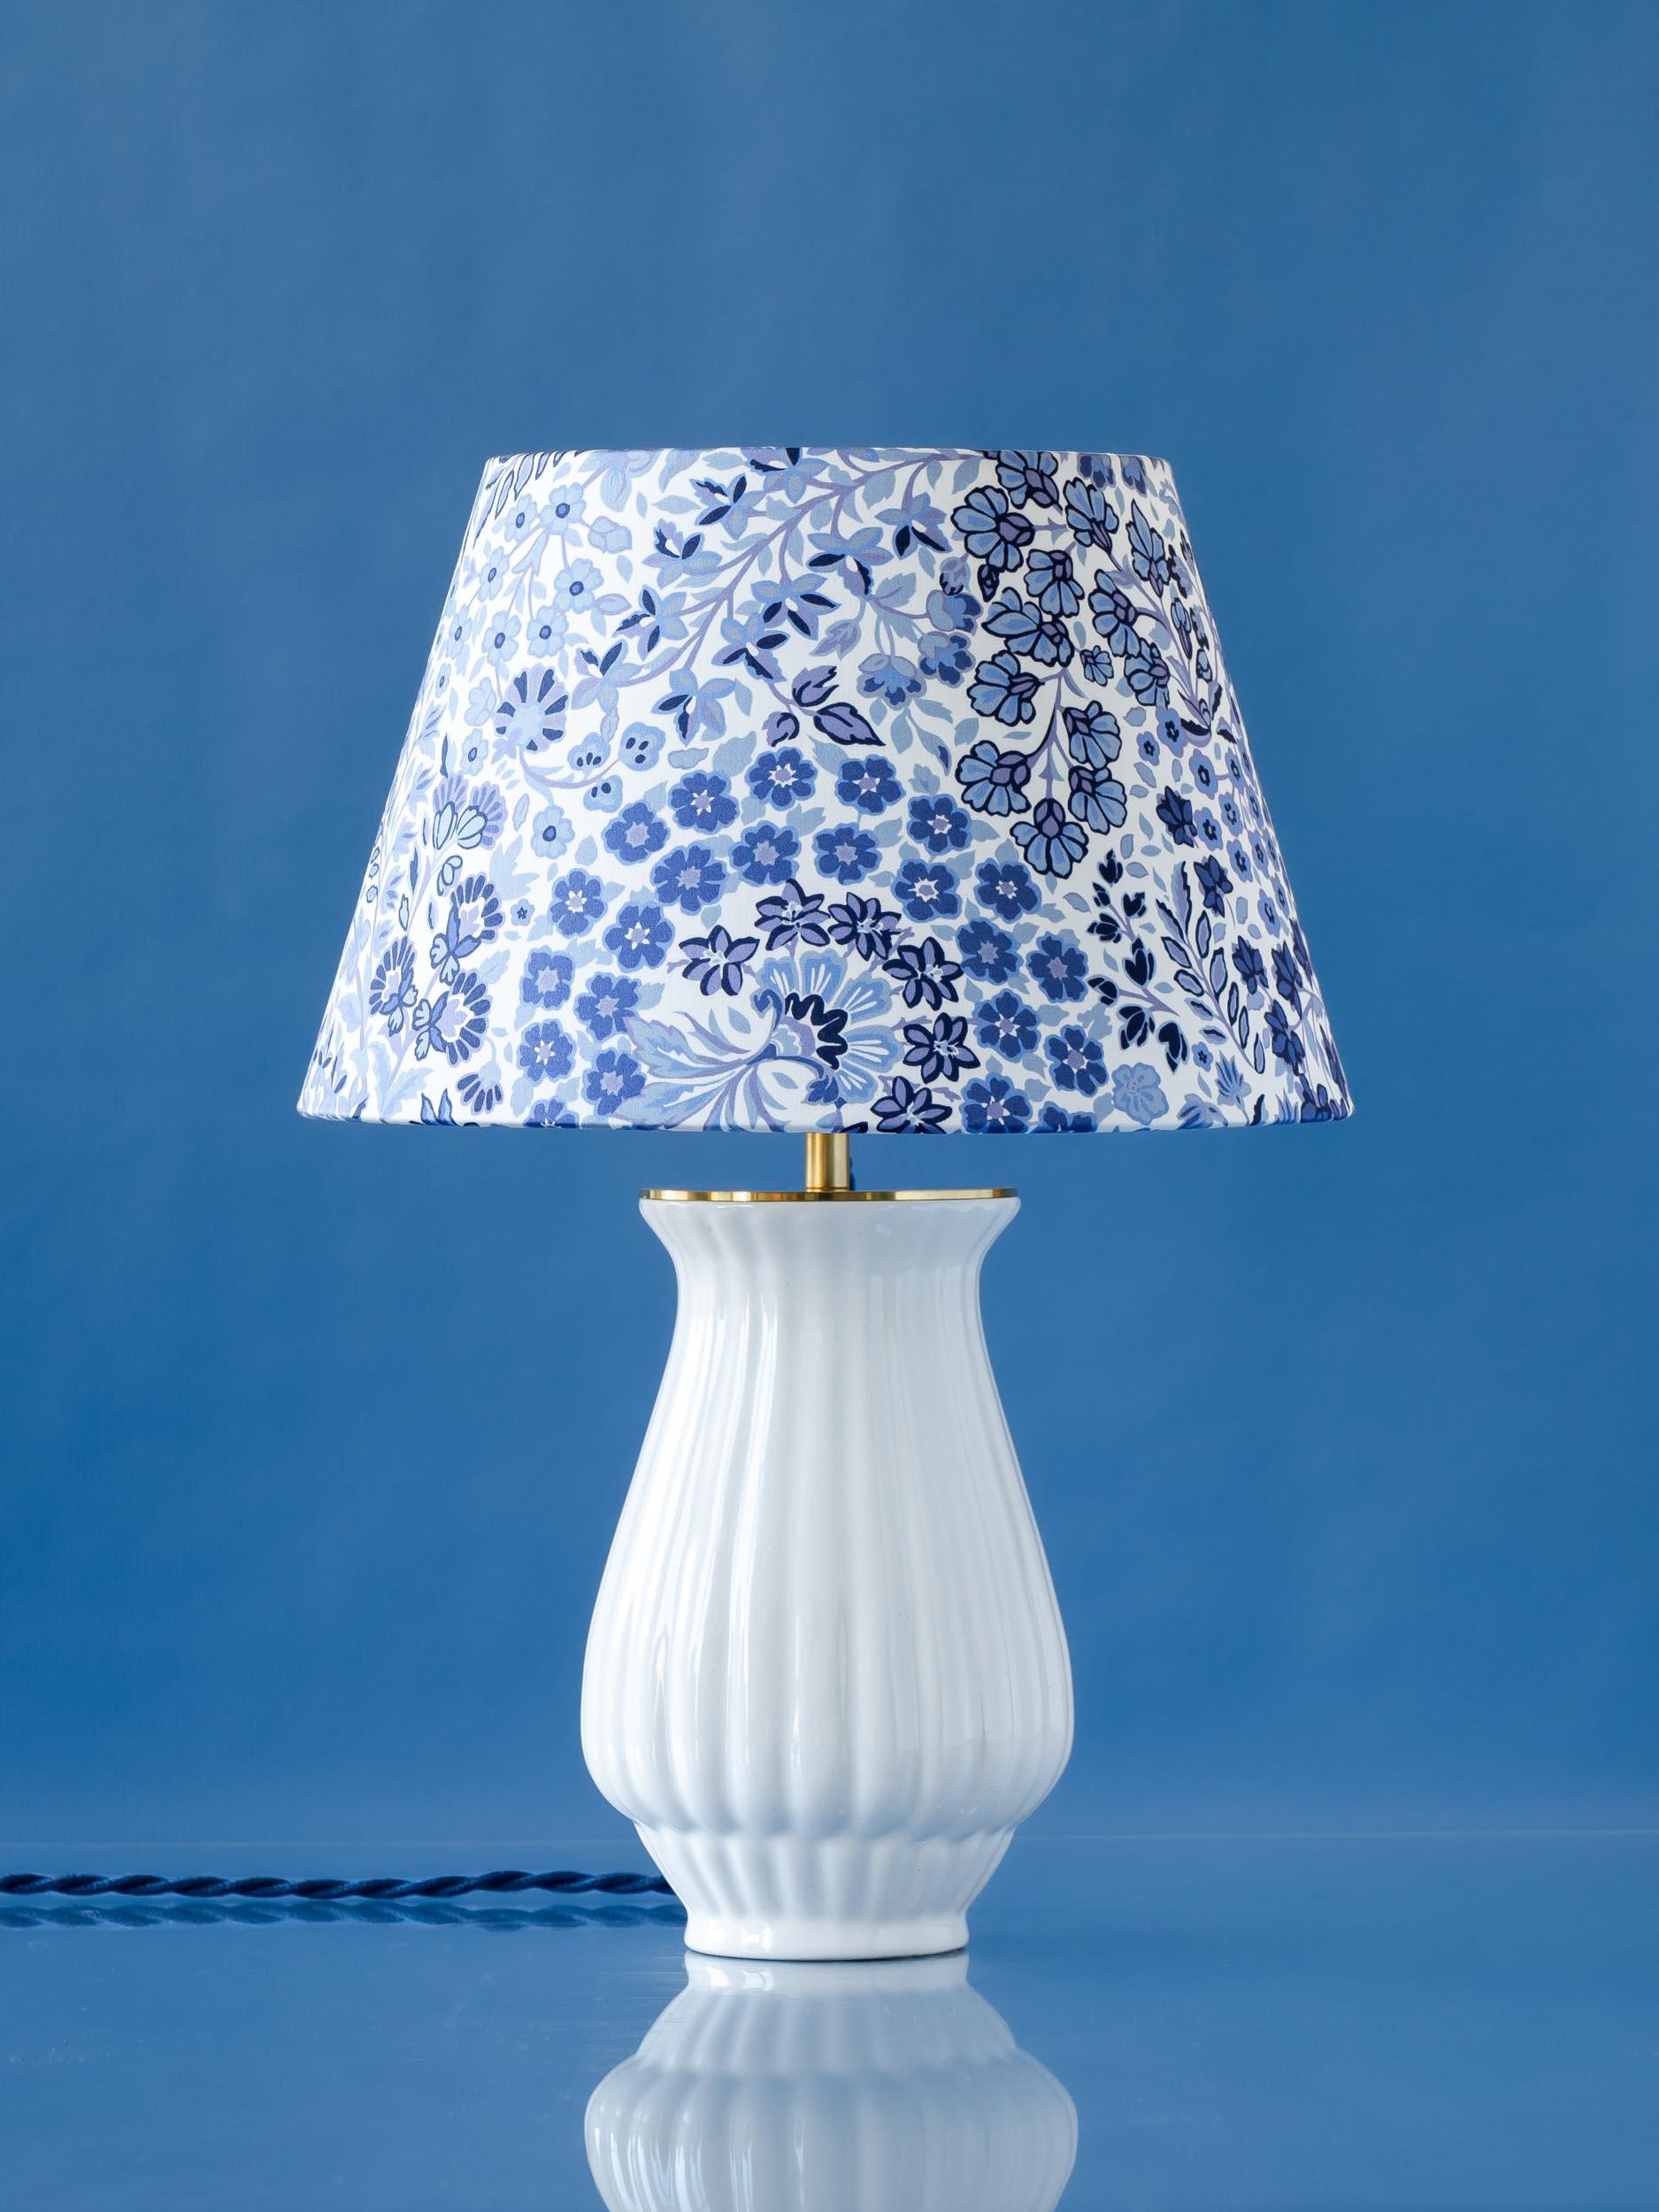 A one-of-a kind lamp, Haven is lovingly handcrafted from a vintage Royal Delft (De Porceleyne Fles) White (Delfts Wit) vase. The uniqueness lies in the shape of the vase and how it catches the light. We’ve paired the delicately ribbed base with a